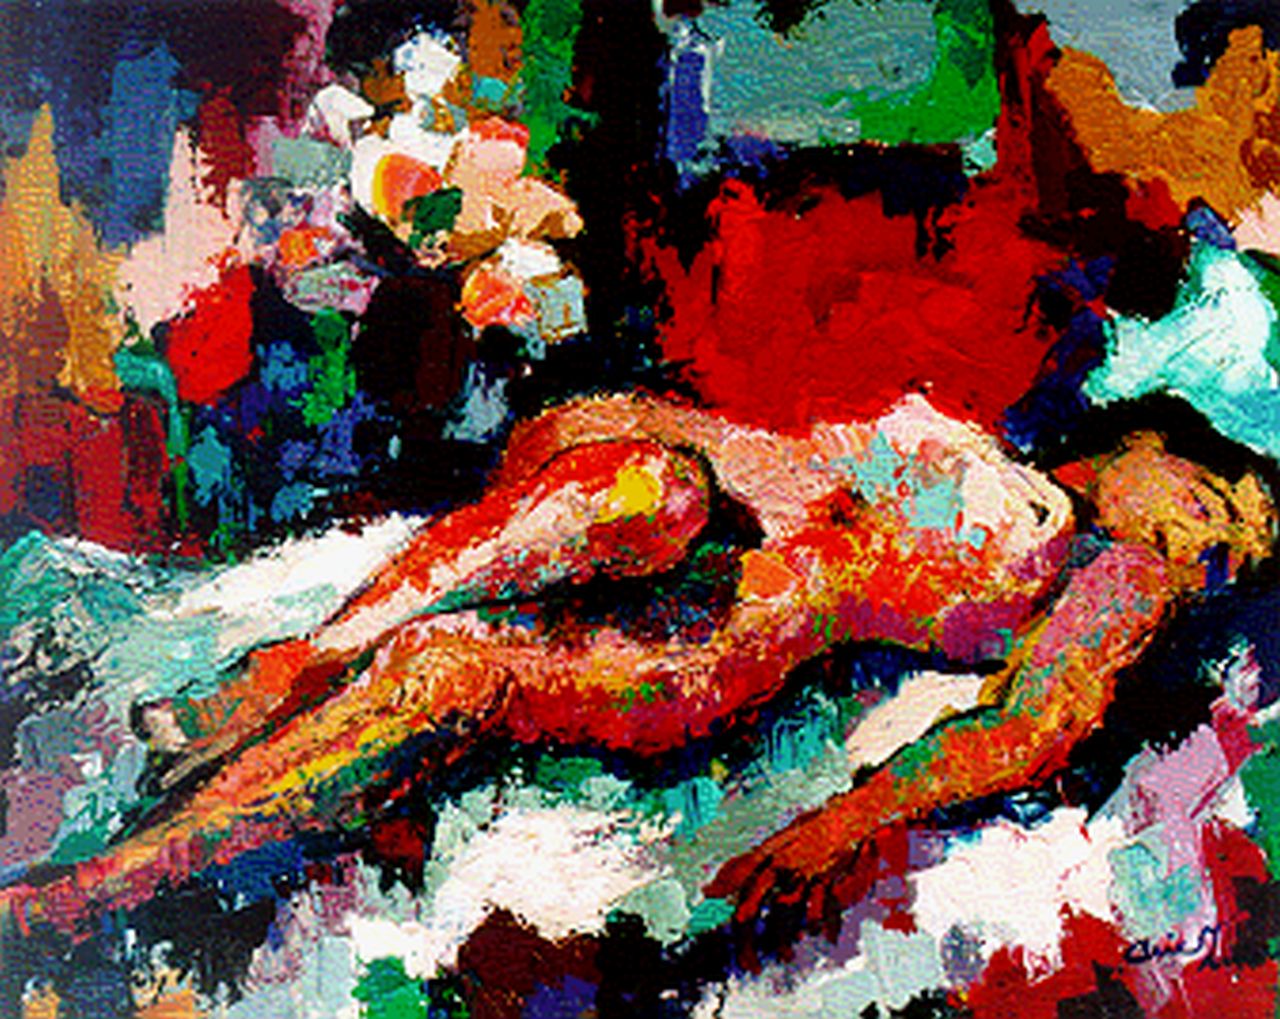 Zuidersma A.  | Arend 'Arie' Zuidersma, Reclining nude, oil on canvas 80.2 x 100.0 cm, signed l.r. and dated '70